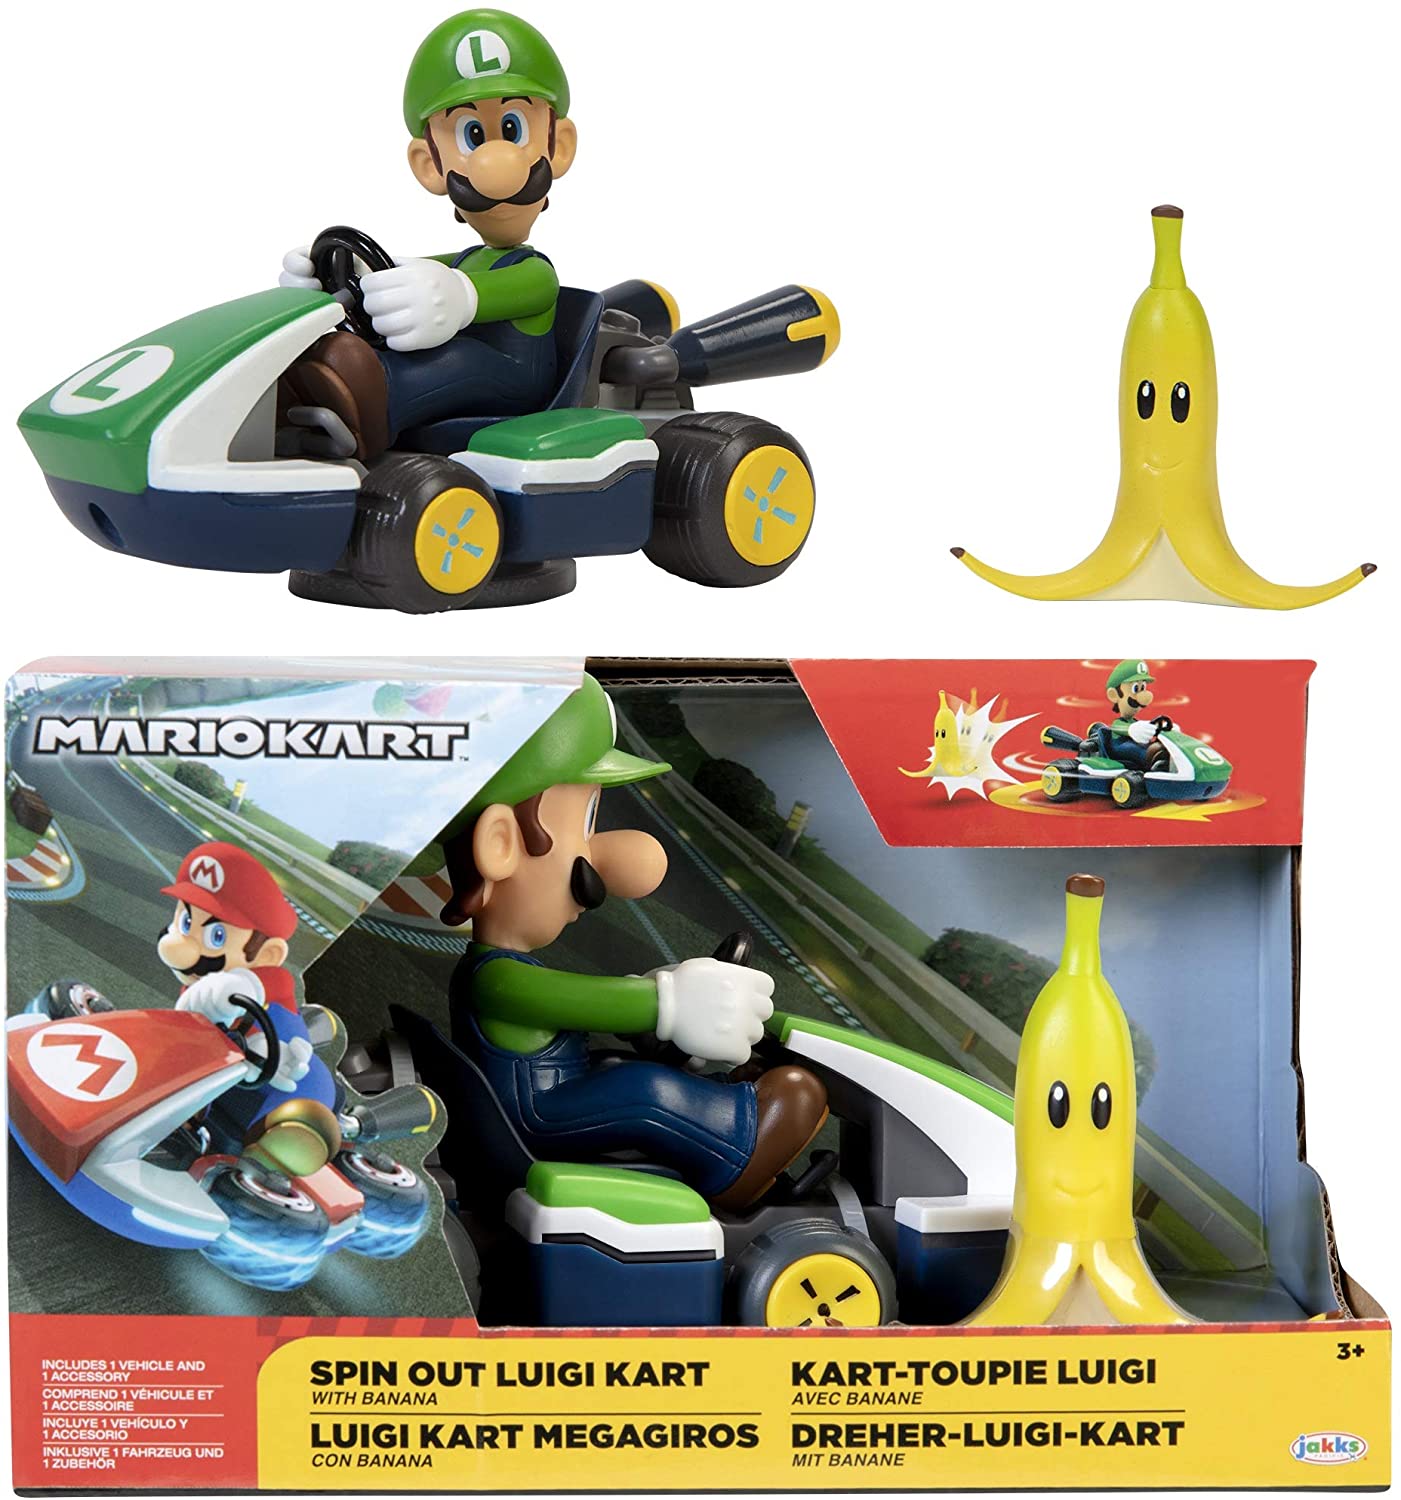 Super Mario Movie Spin Out Kart